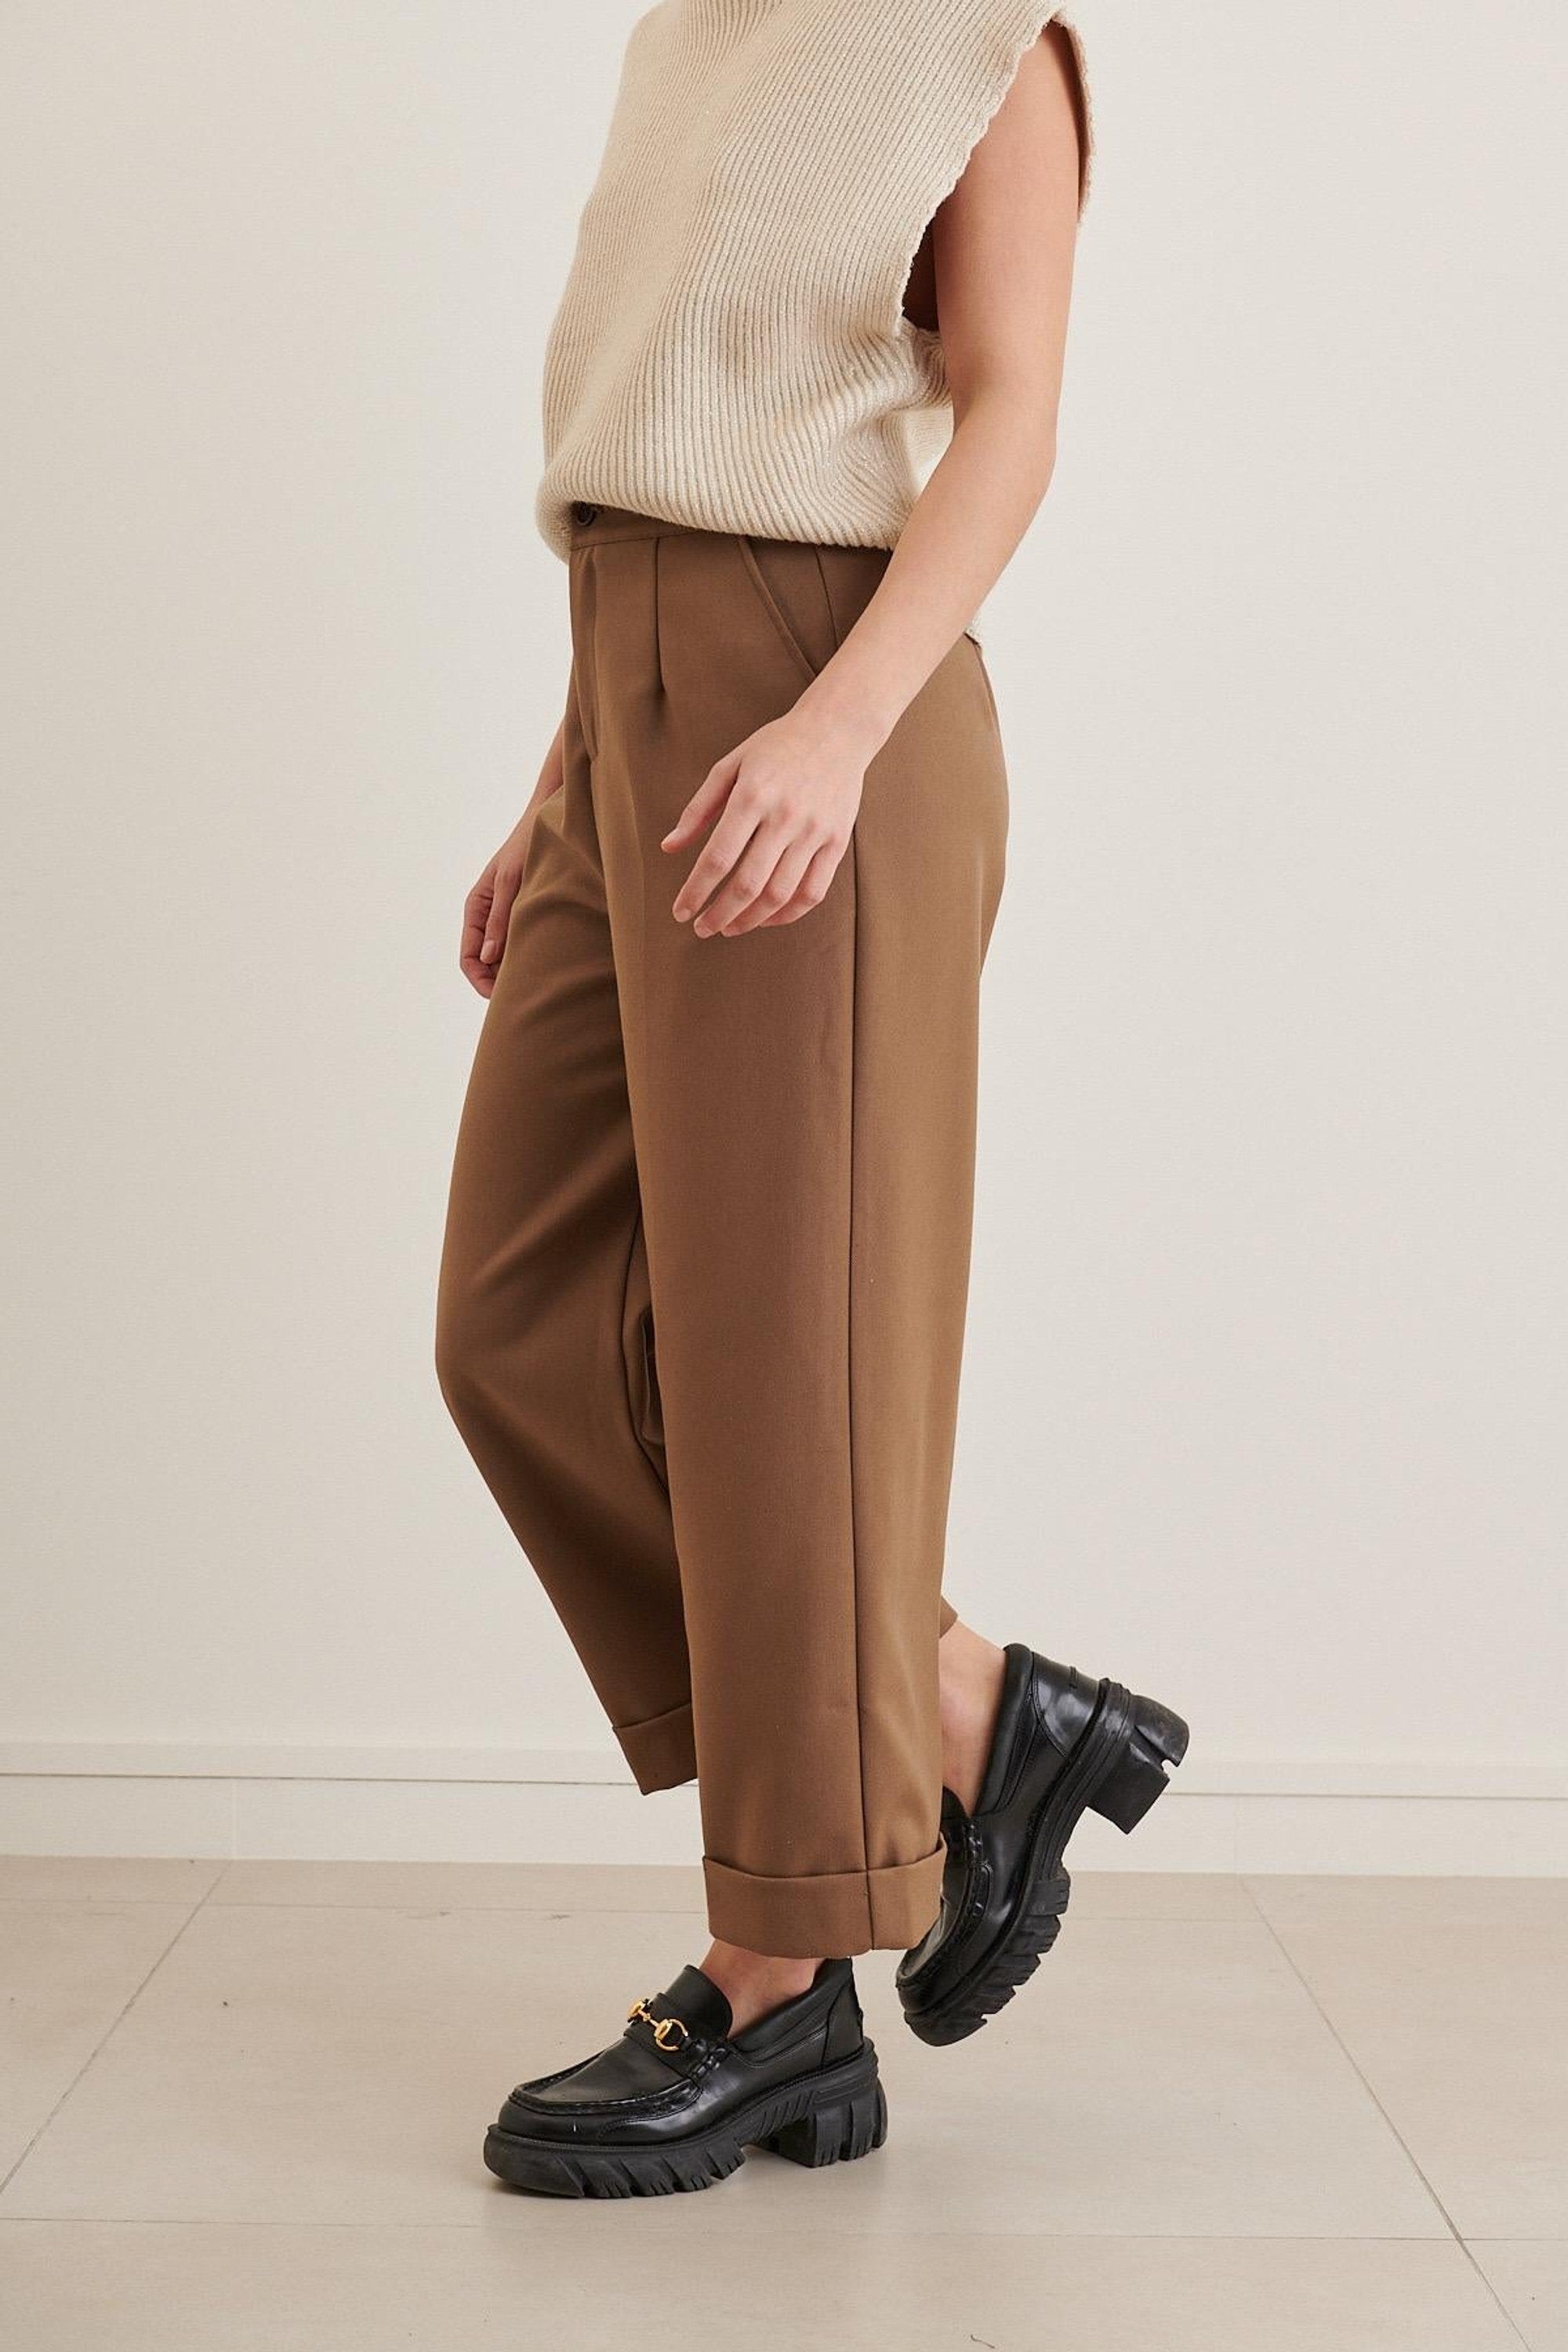 Clever Alice French Cuffed Pant - clever alice